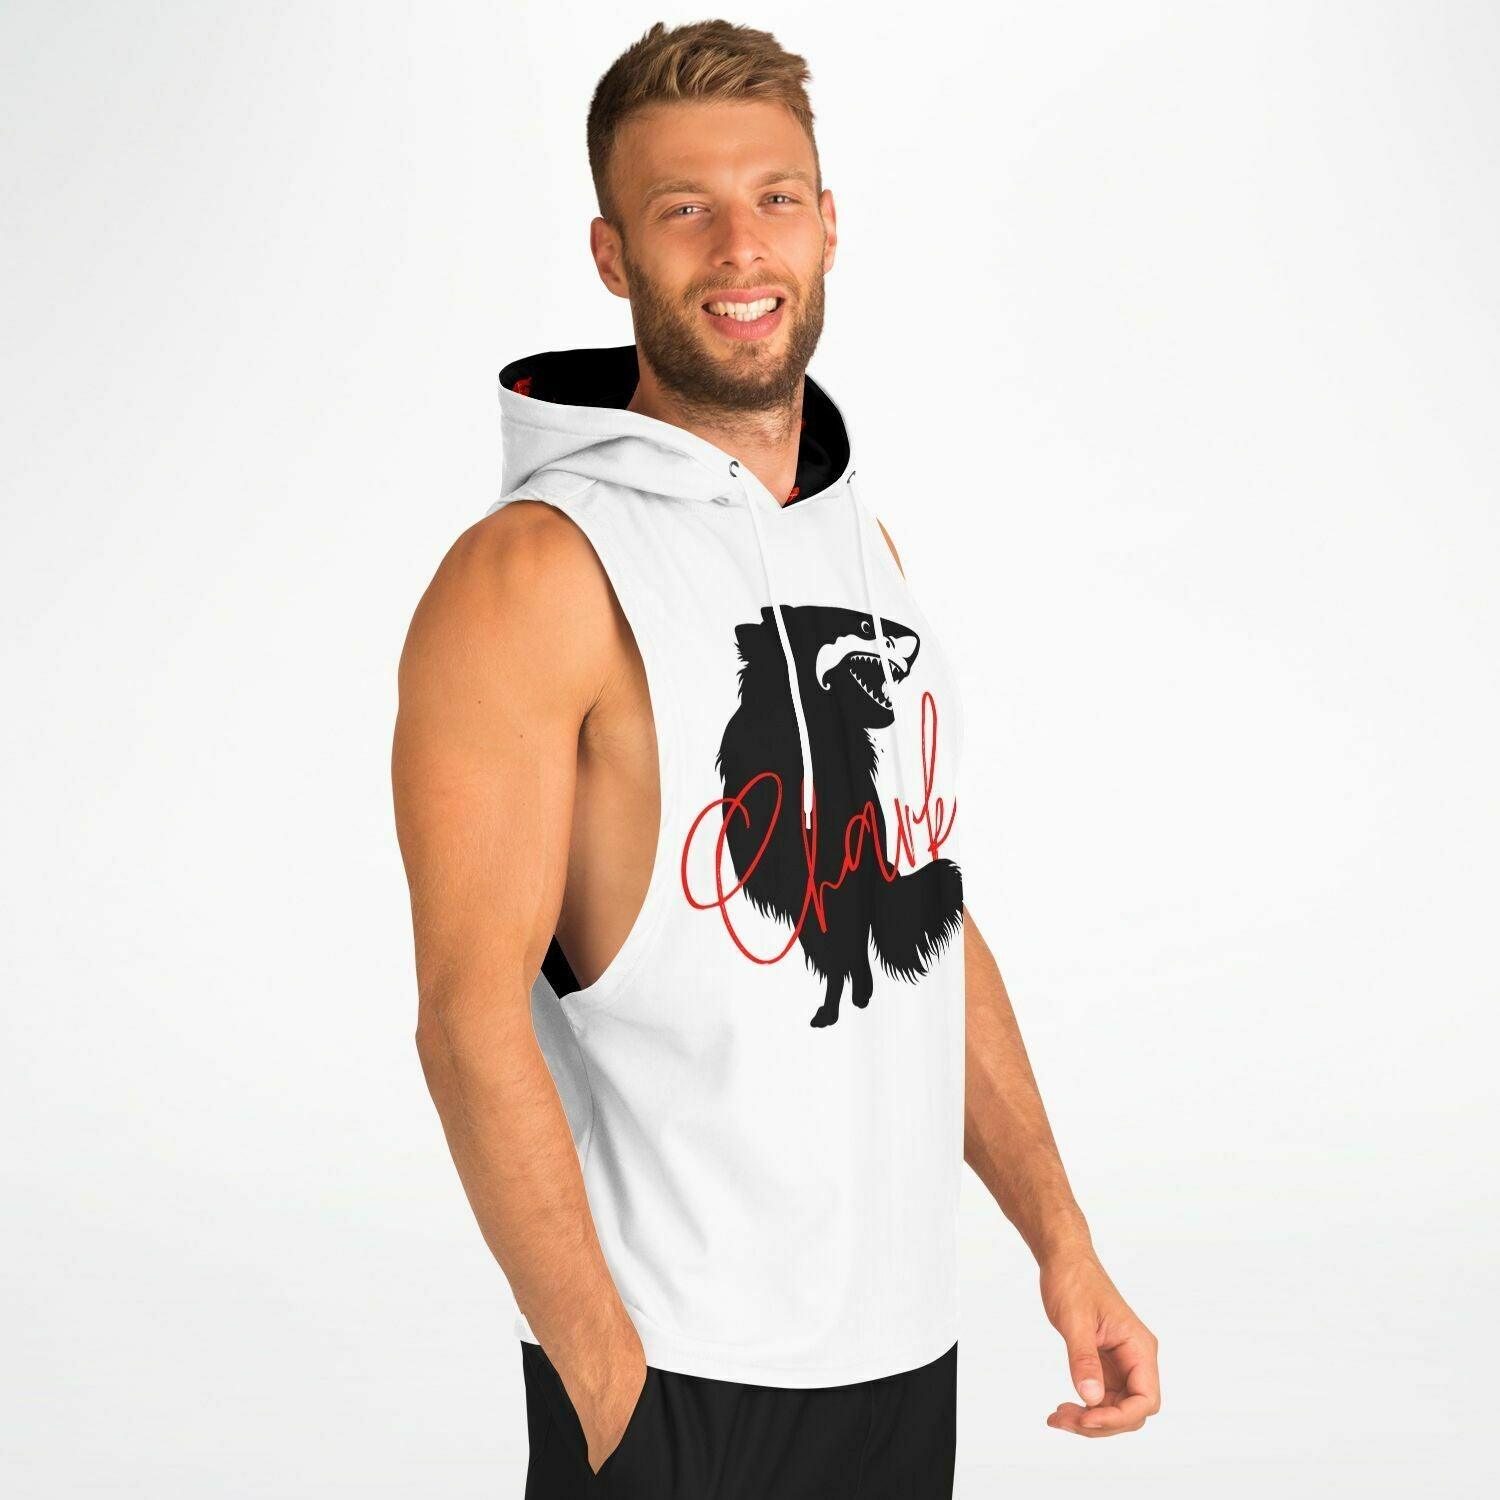 Chark punky white sleeveless hoodie. Front: black chihuahua with the face of a great white shark - mouth open to show off jaws lined with sharp white teeth, with "Chark" in red cursive font. Back: another shark-faced chi and a "dictionary entry" of the noun "chark": a chihuahua with teeth like a shark. Contrasting hoodie inner: Black with red Chimigos logos. So cool! Sporty bodybuilder style drop armholes. 95% recycled polyester. Sizes XS - 4XL. Design by Renate Kriegler for Chimigos.